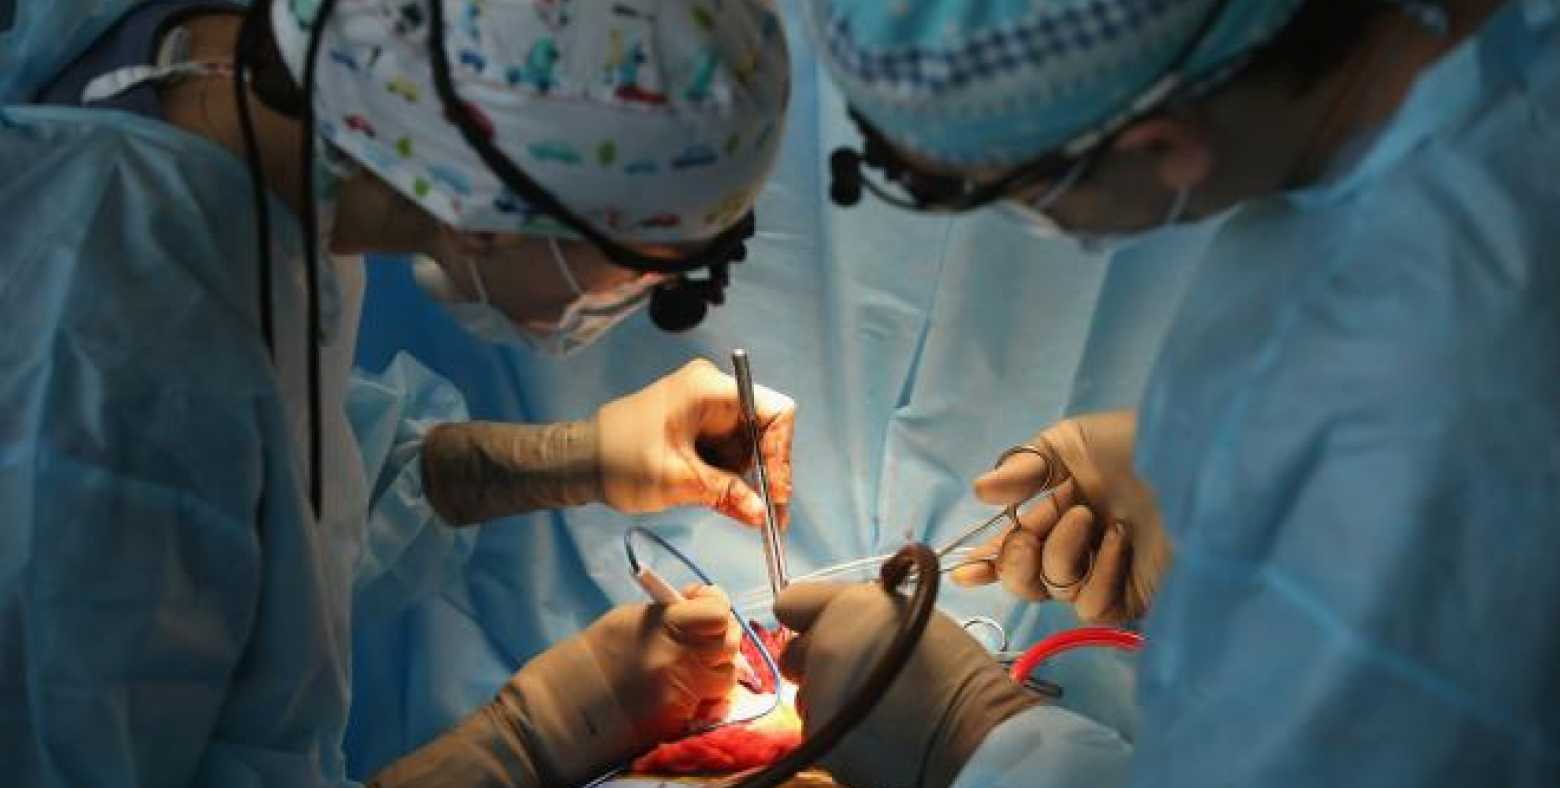 Two doctors performing surgery on a patient